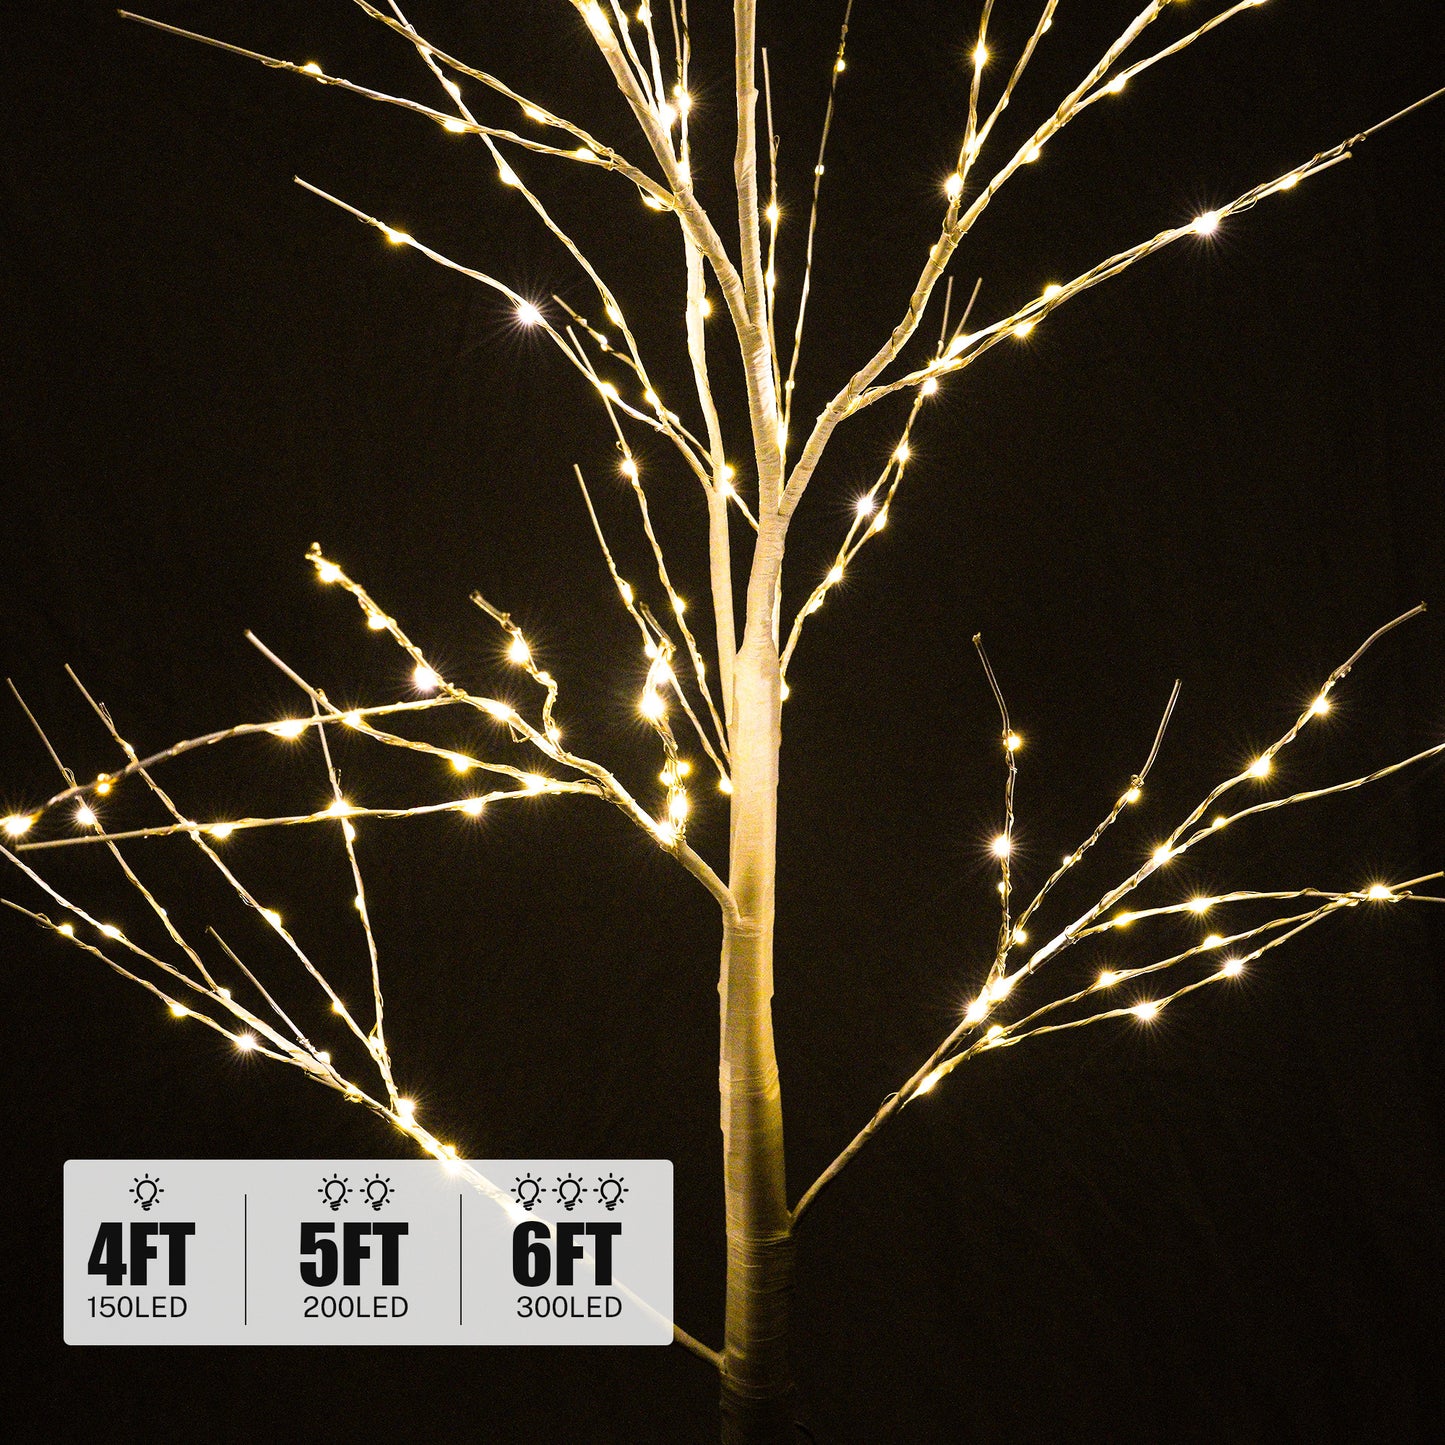 4ft, 5ft and 6ft Birch Tree, Set of 3, SYNGAR Birch Tree with Warm White LED Lights, for Christmas Decoration, Fits for Indoor Outdoor Garden Party Wedding, Lighted Christmas Tree for Home, Y033